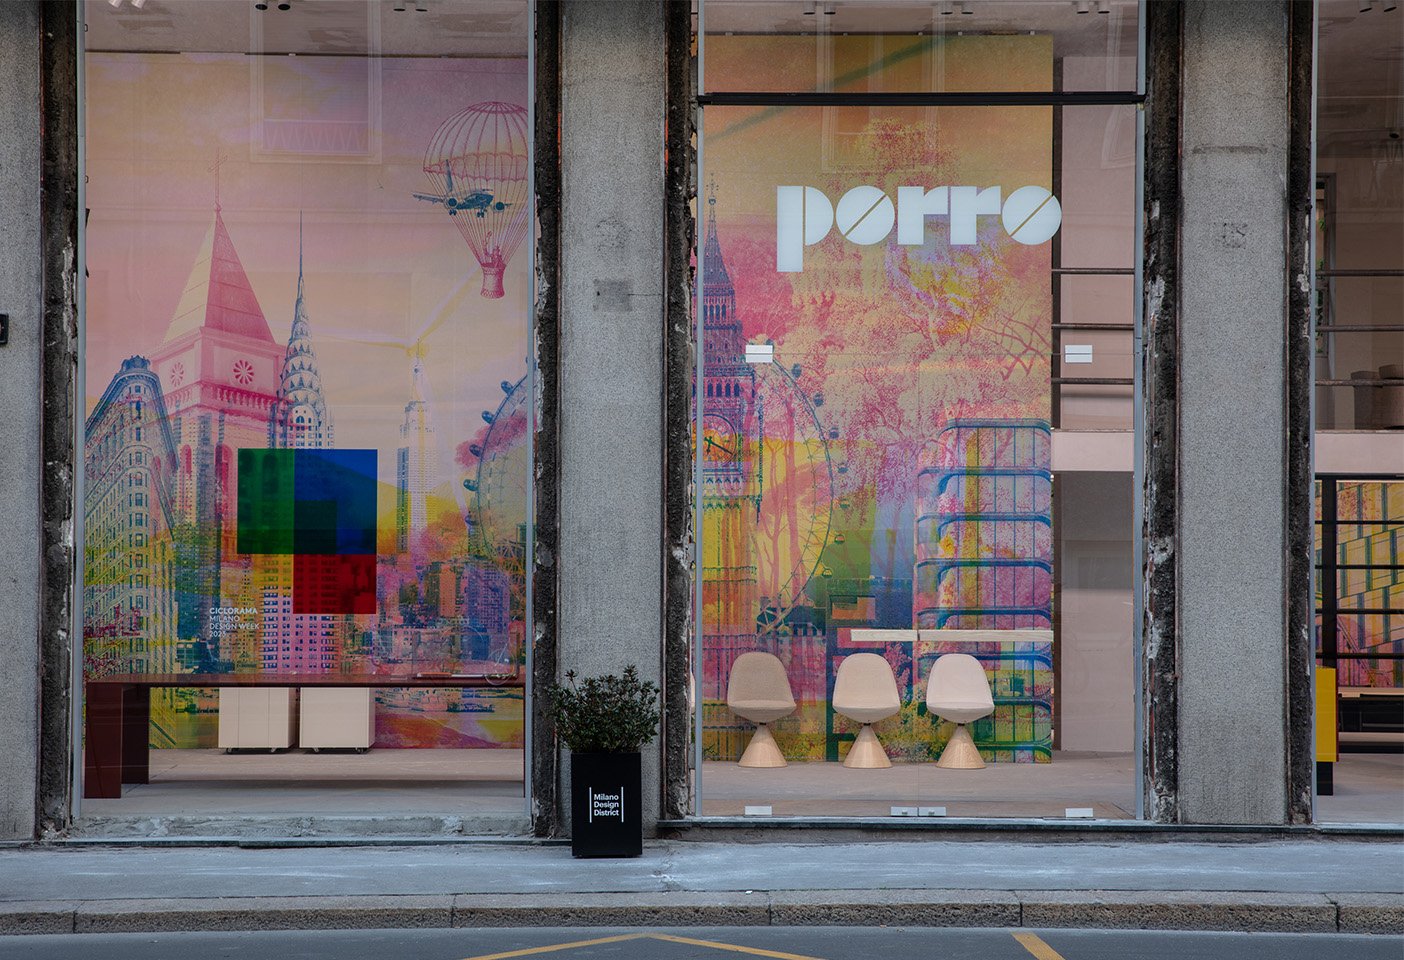 The Porro showroom in flux, with an installation designed by Piero Lissoni and featuring work by the iconic Italian designer Bruno Munari. Photo c/o Porro.